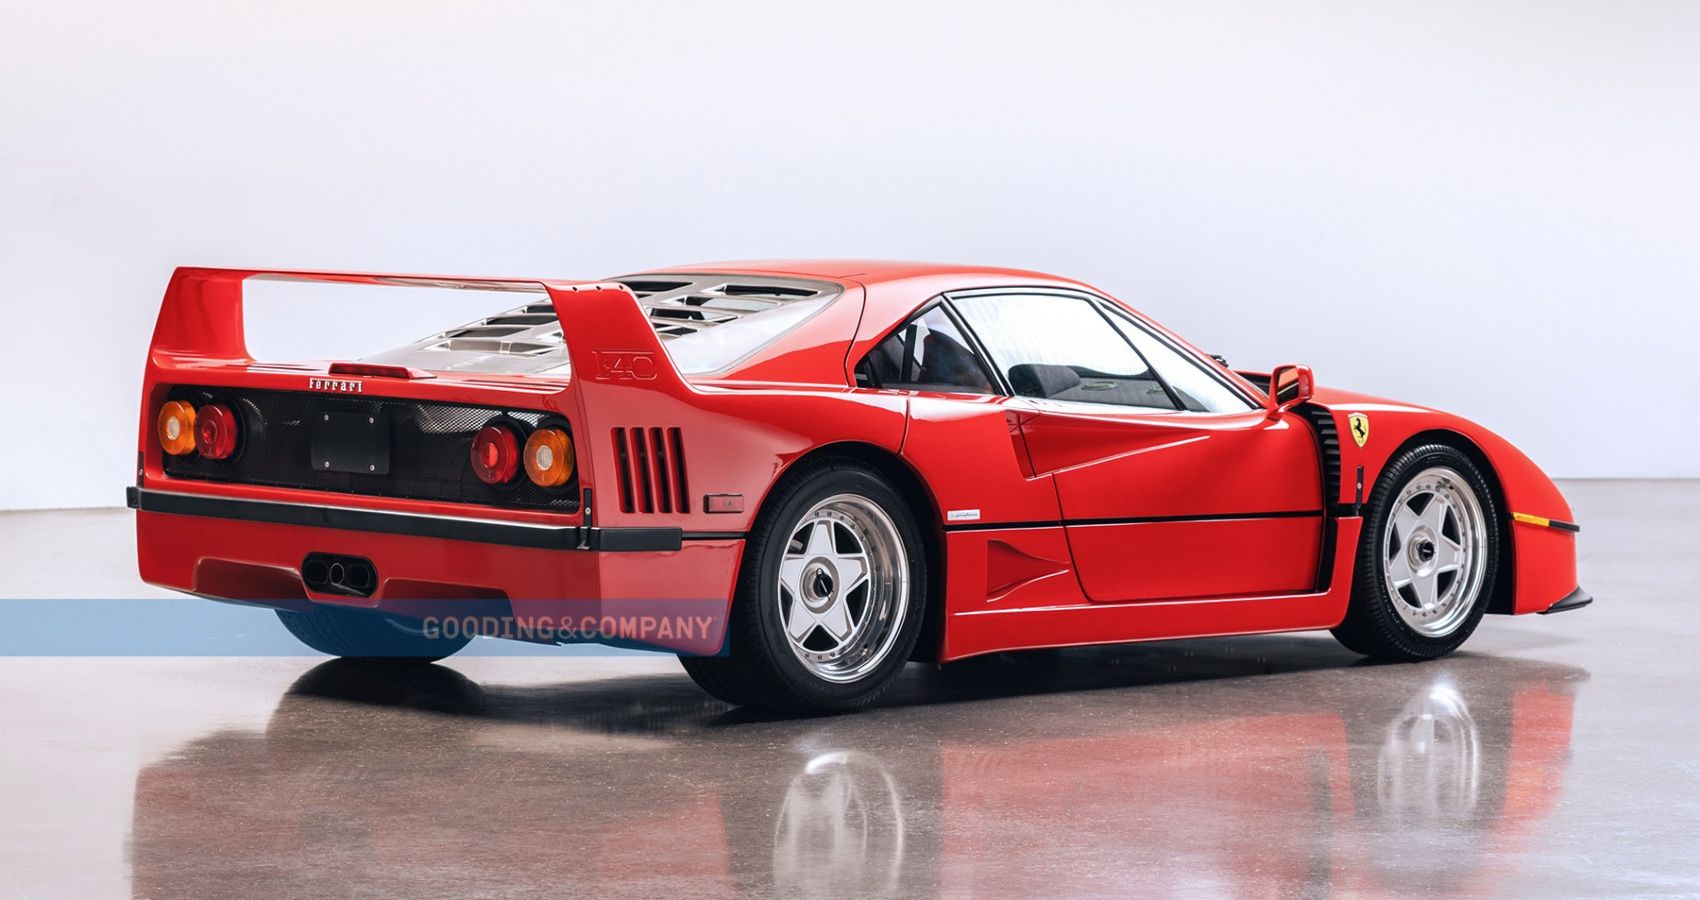 This Low Mileage 1990 Ferrari F40 Is Headed For 22 Pebble Beach Auction